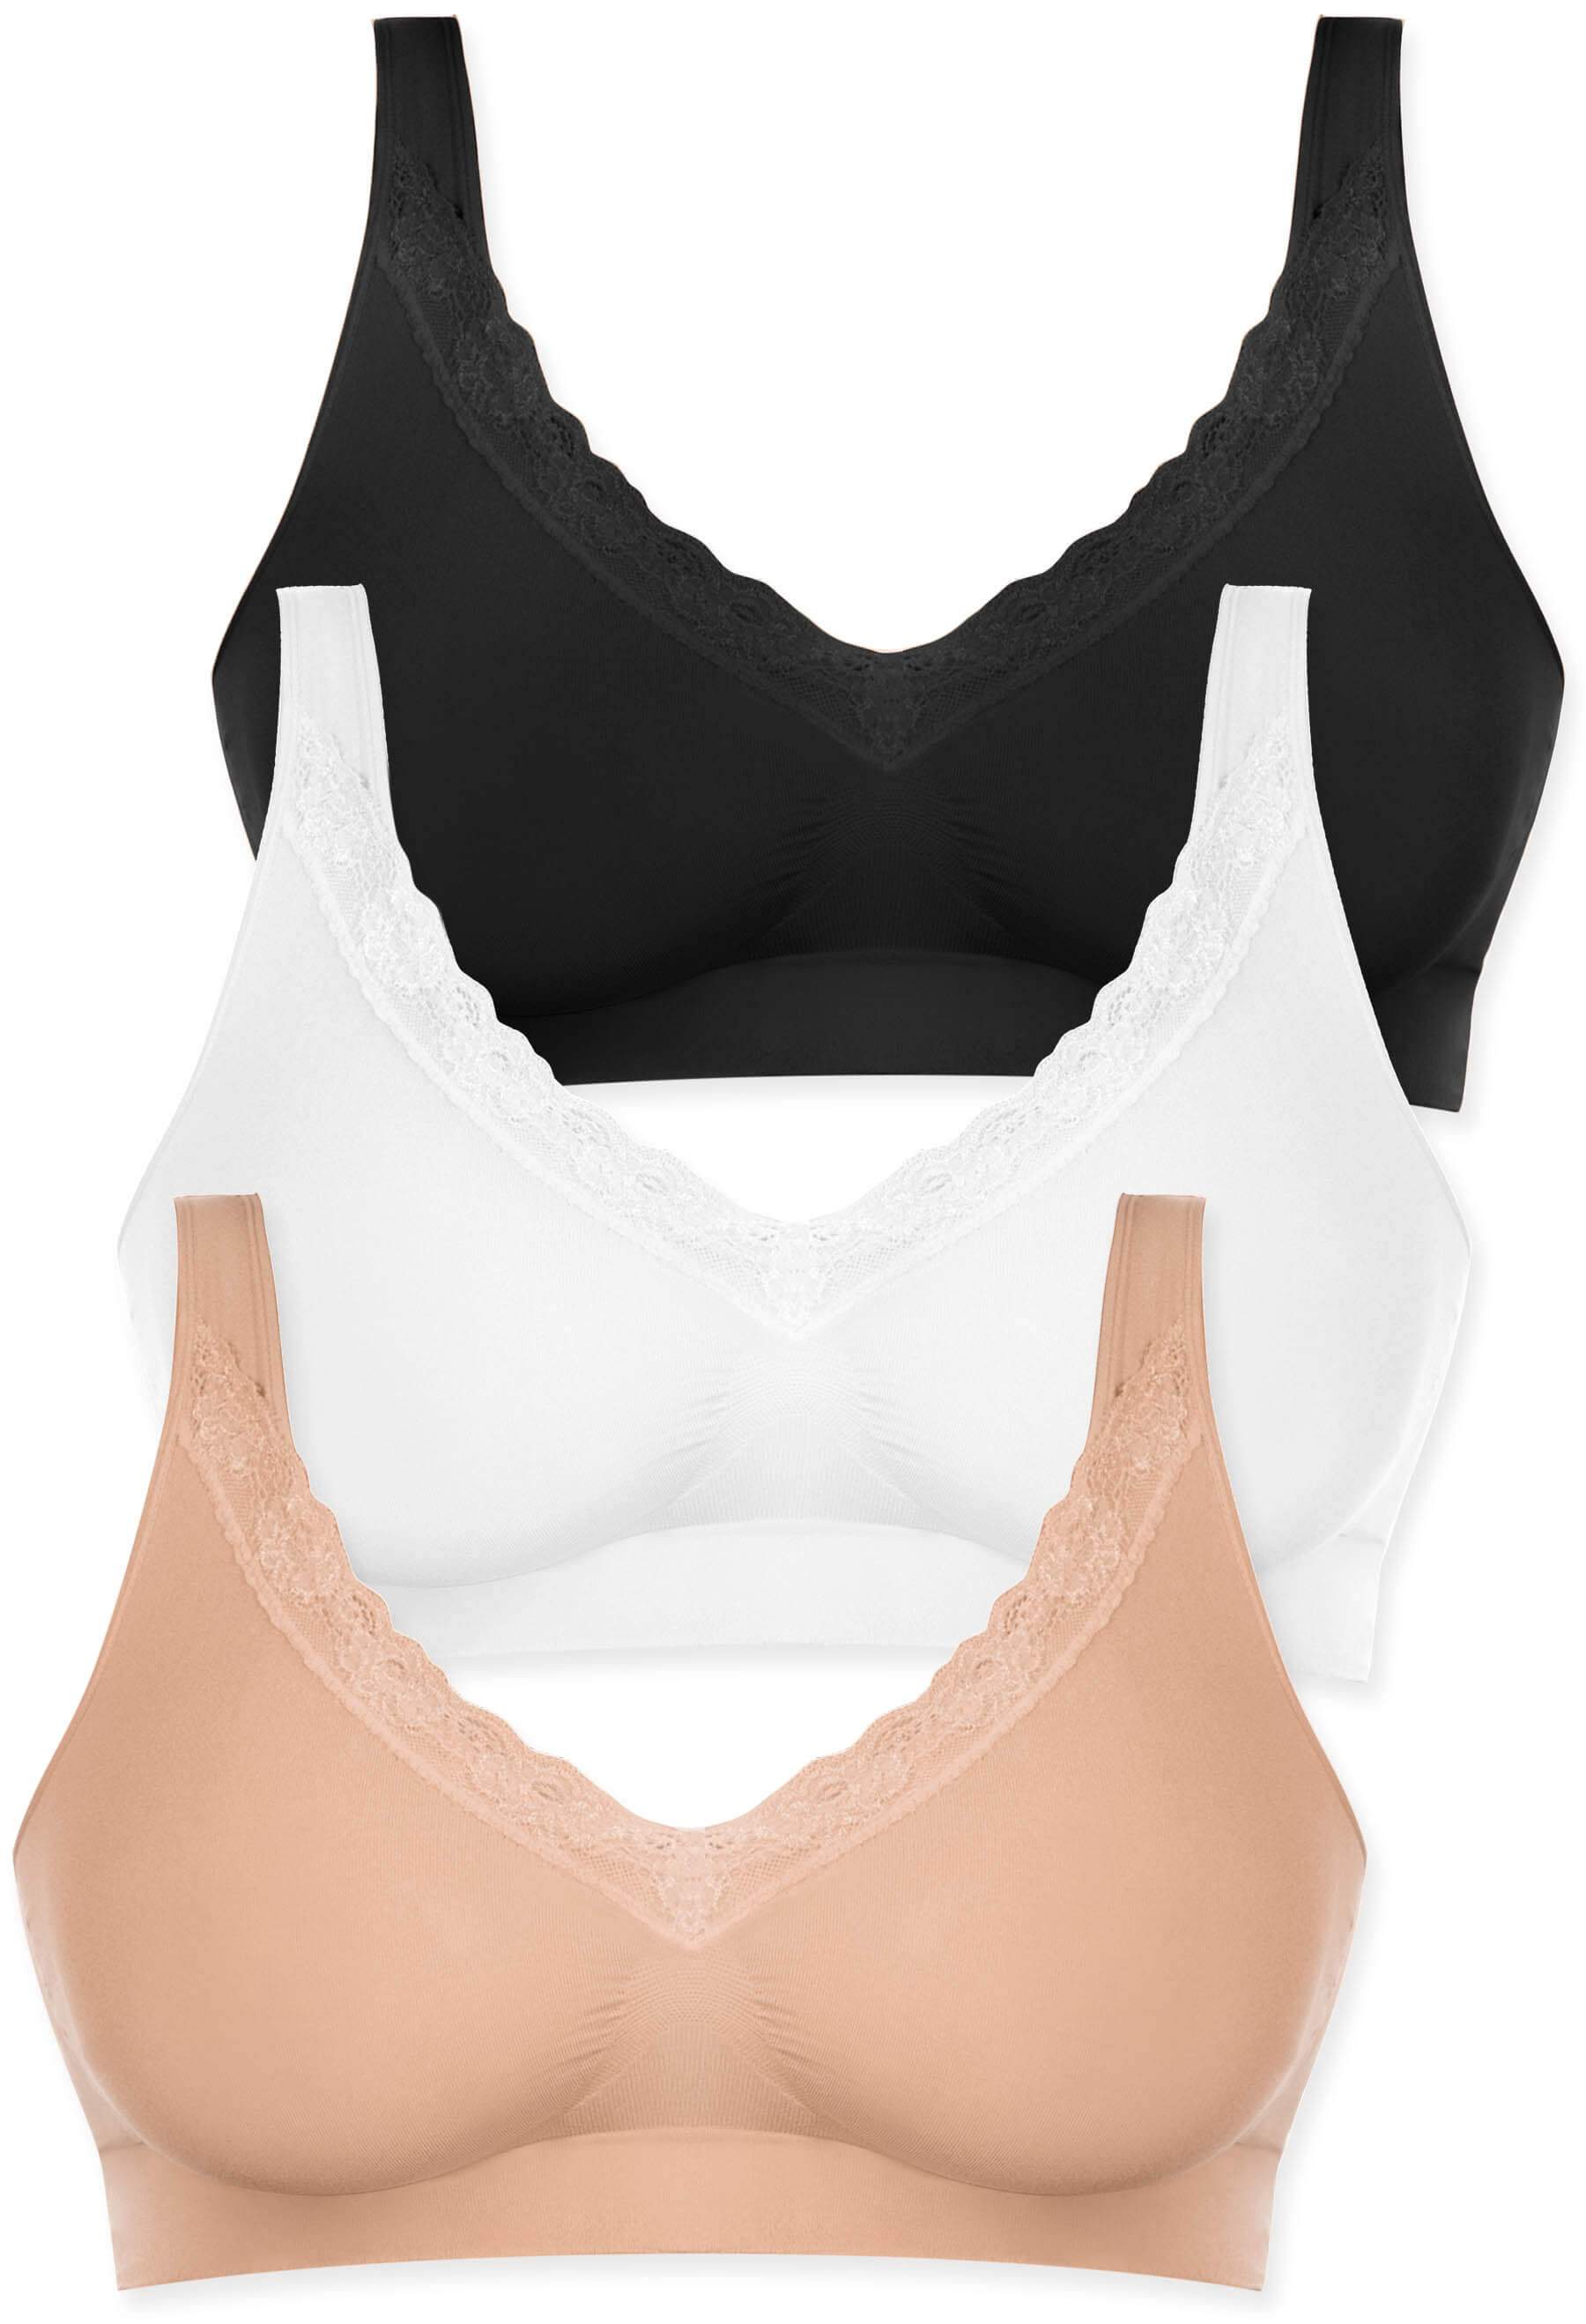 Buy Large Bosom Womens Bra Full Support Wireless Lingerie Plus Size  Bralette Bh Crop Top A B C D DD E F Cup Nude Cup Size DD Bands Size 36 at